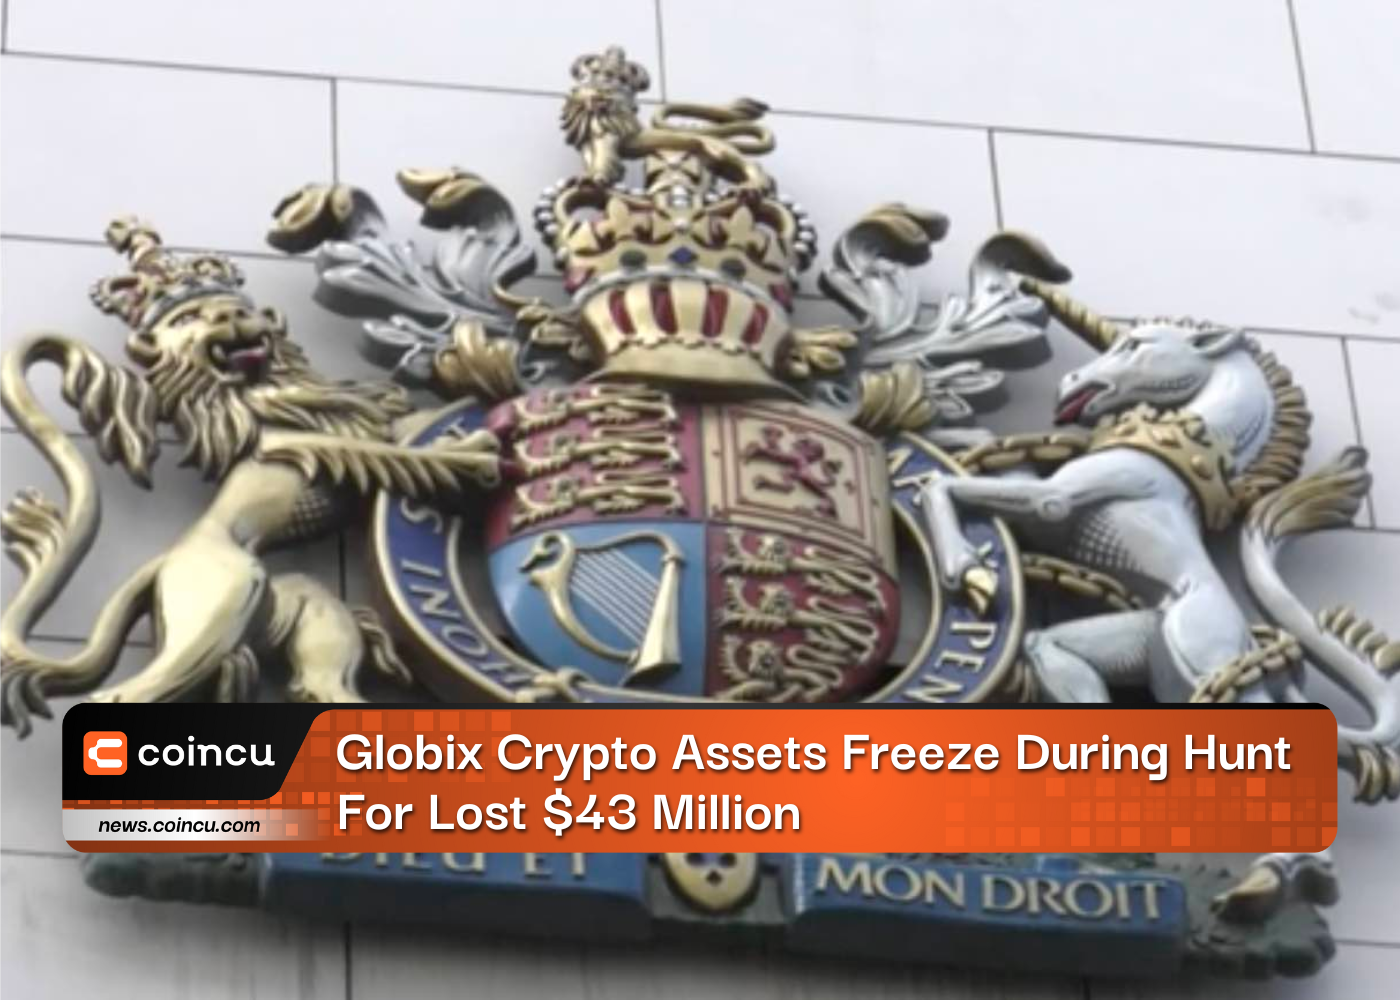 Globix Crypto Assets Freeze During Hunt For Lost $43 Million